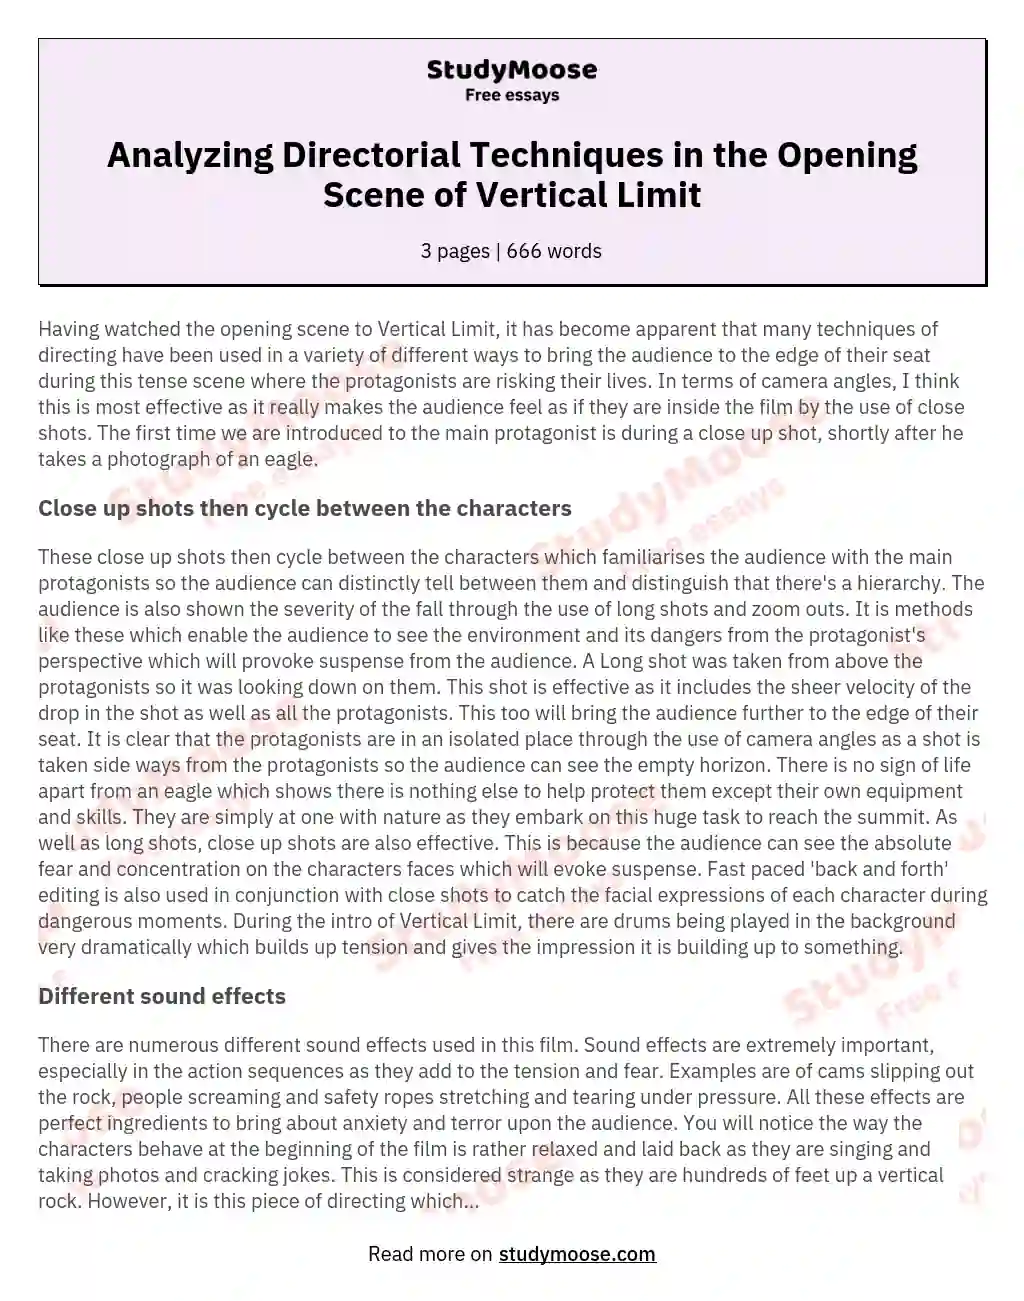 Analyzing Directorial Techniques in the Opening Scene of Vertical Limit essay